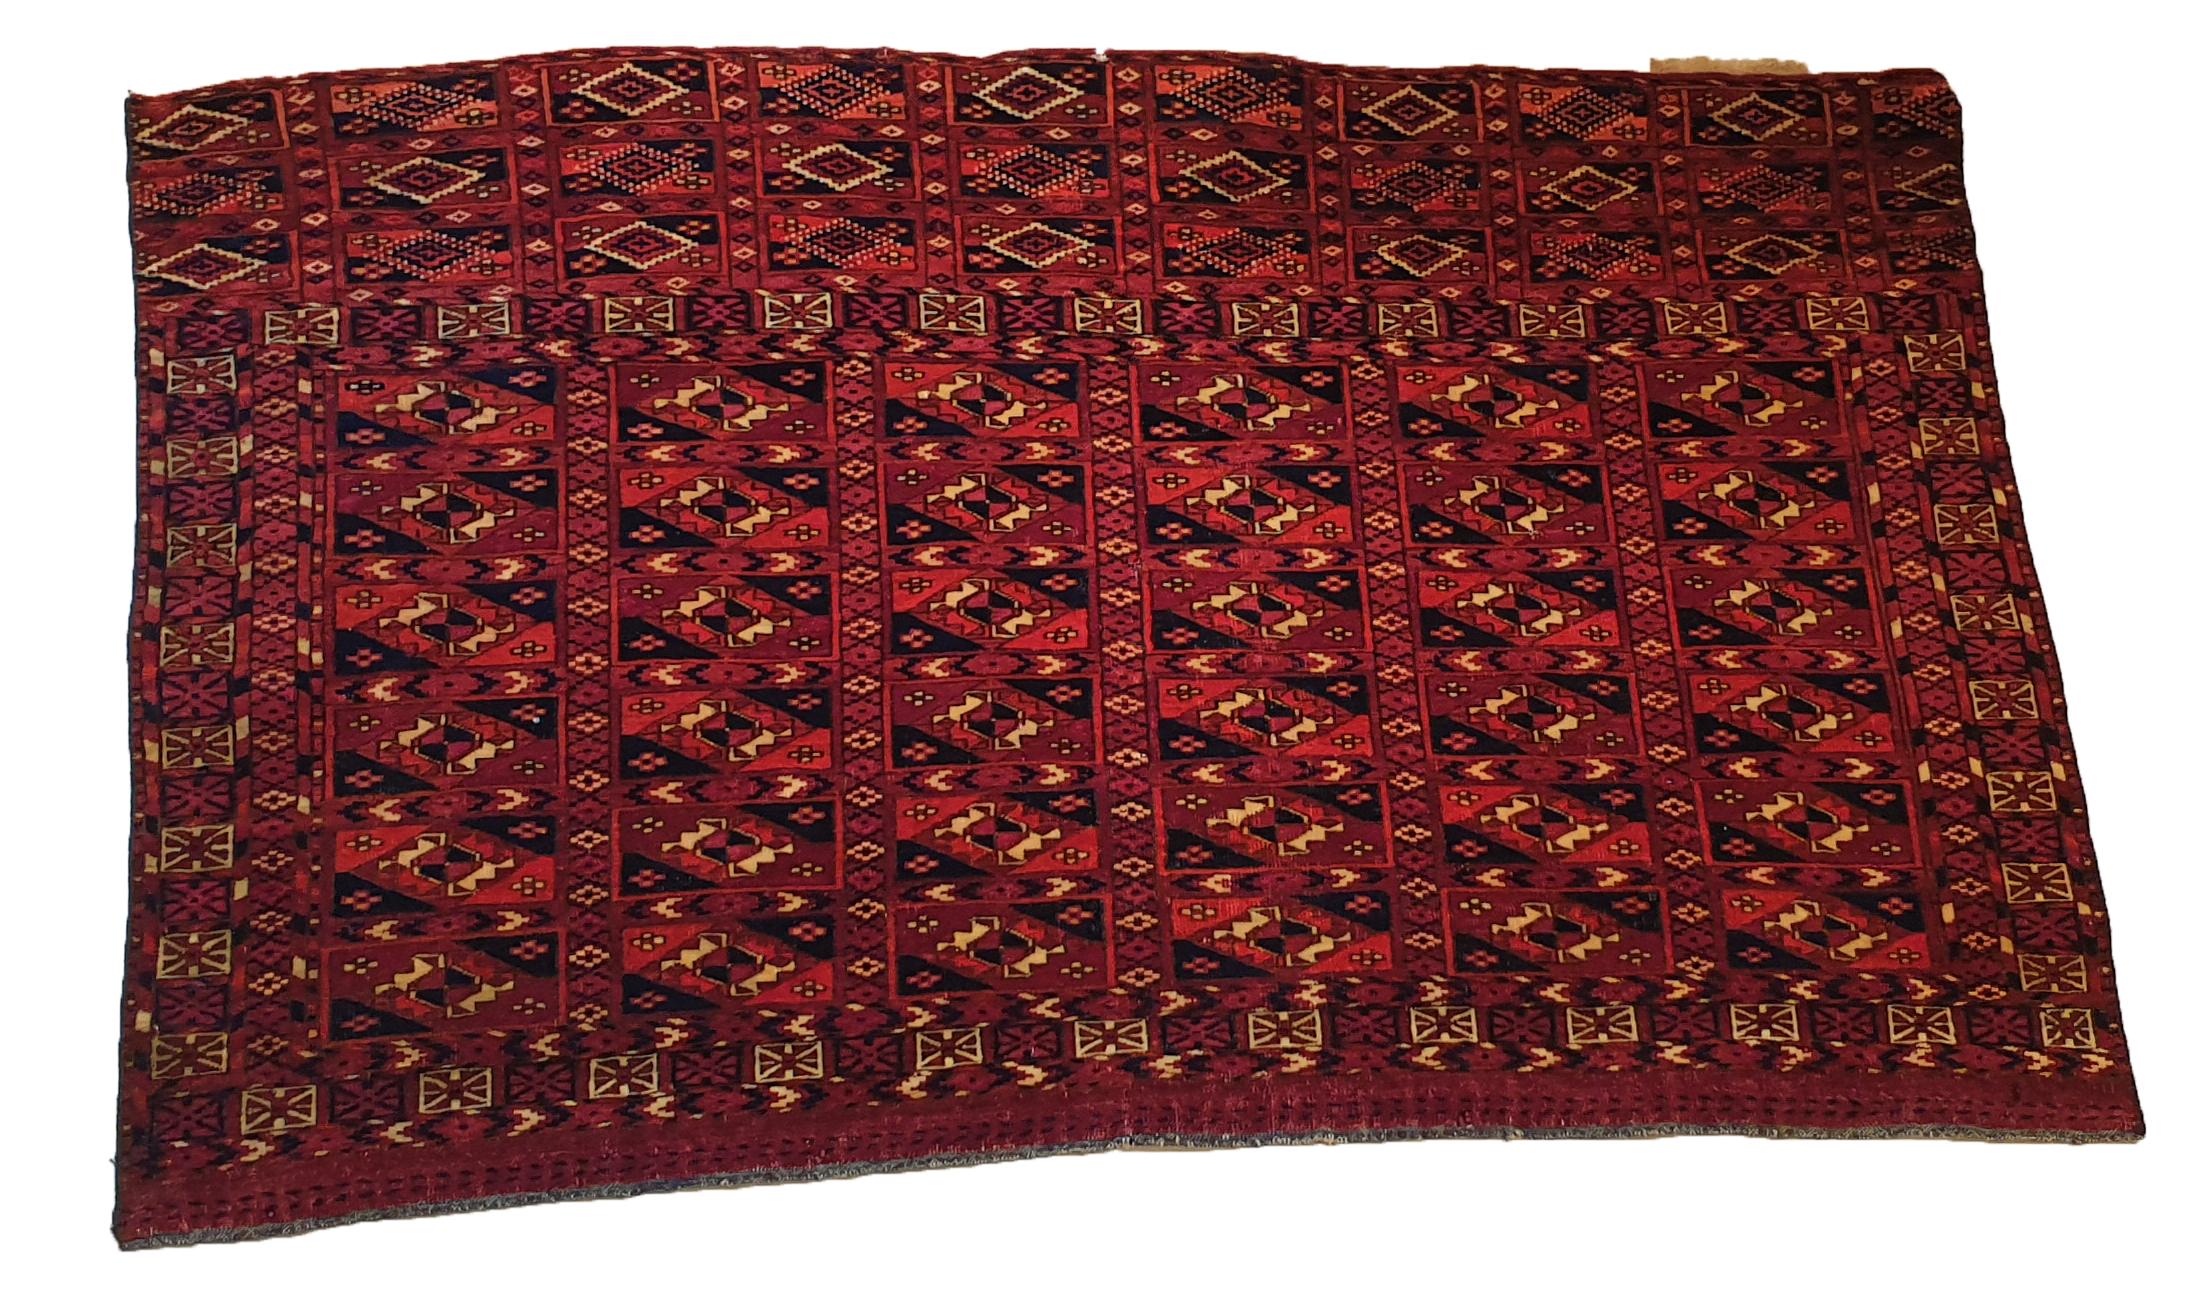 647 - beautiful fine chuval Turkmen 19th century with nice tribal design and natural colors with red and blue, very finely hand-knotted with wool and silk velvet on wool background.